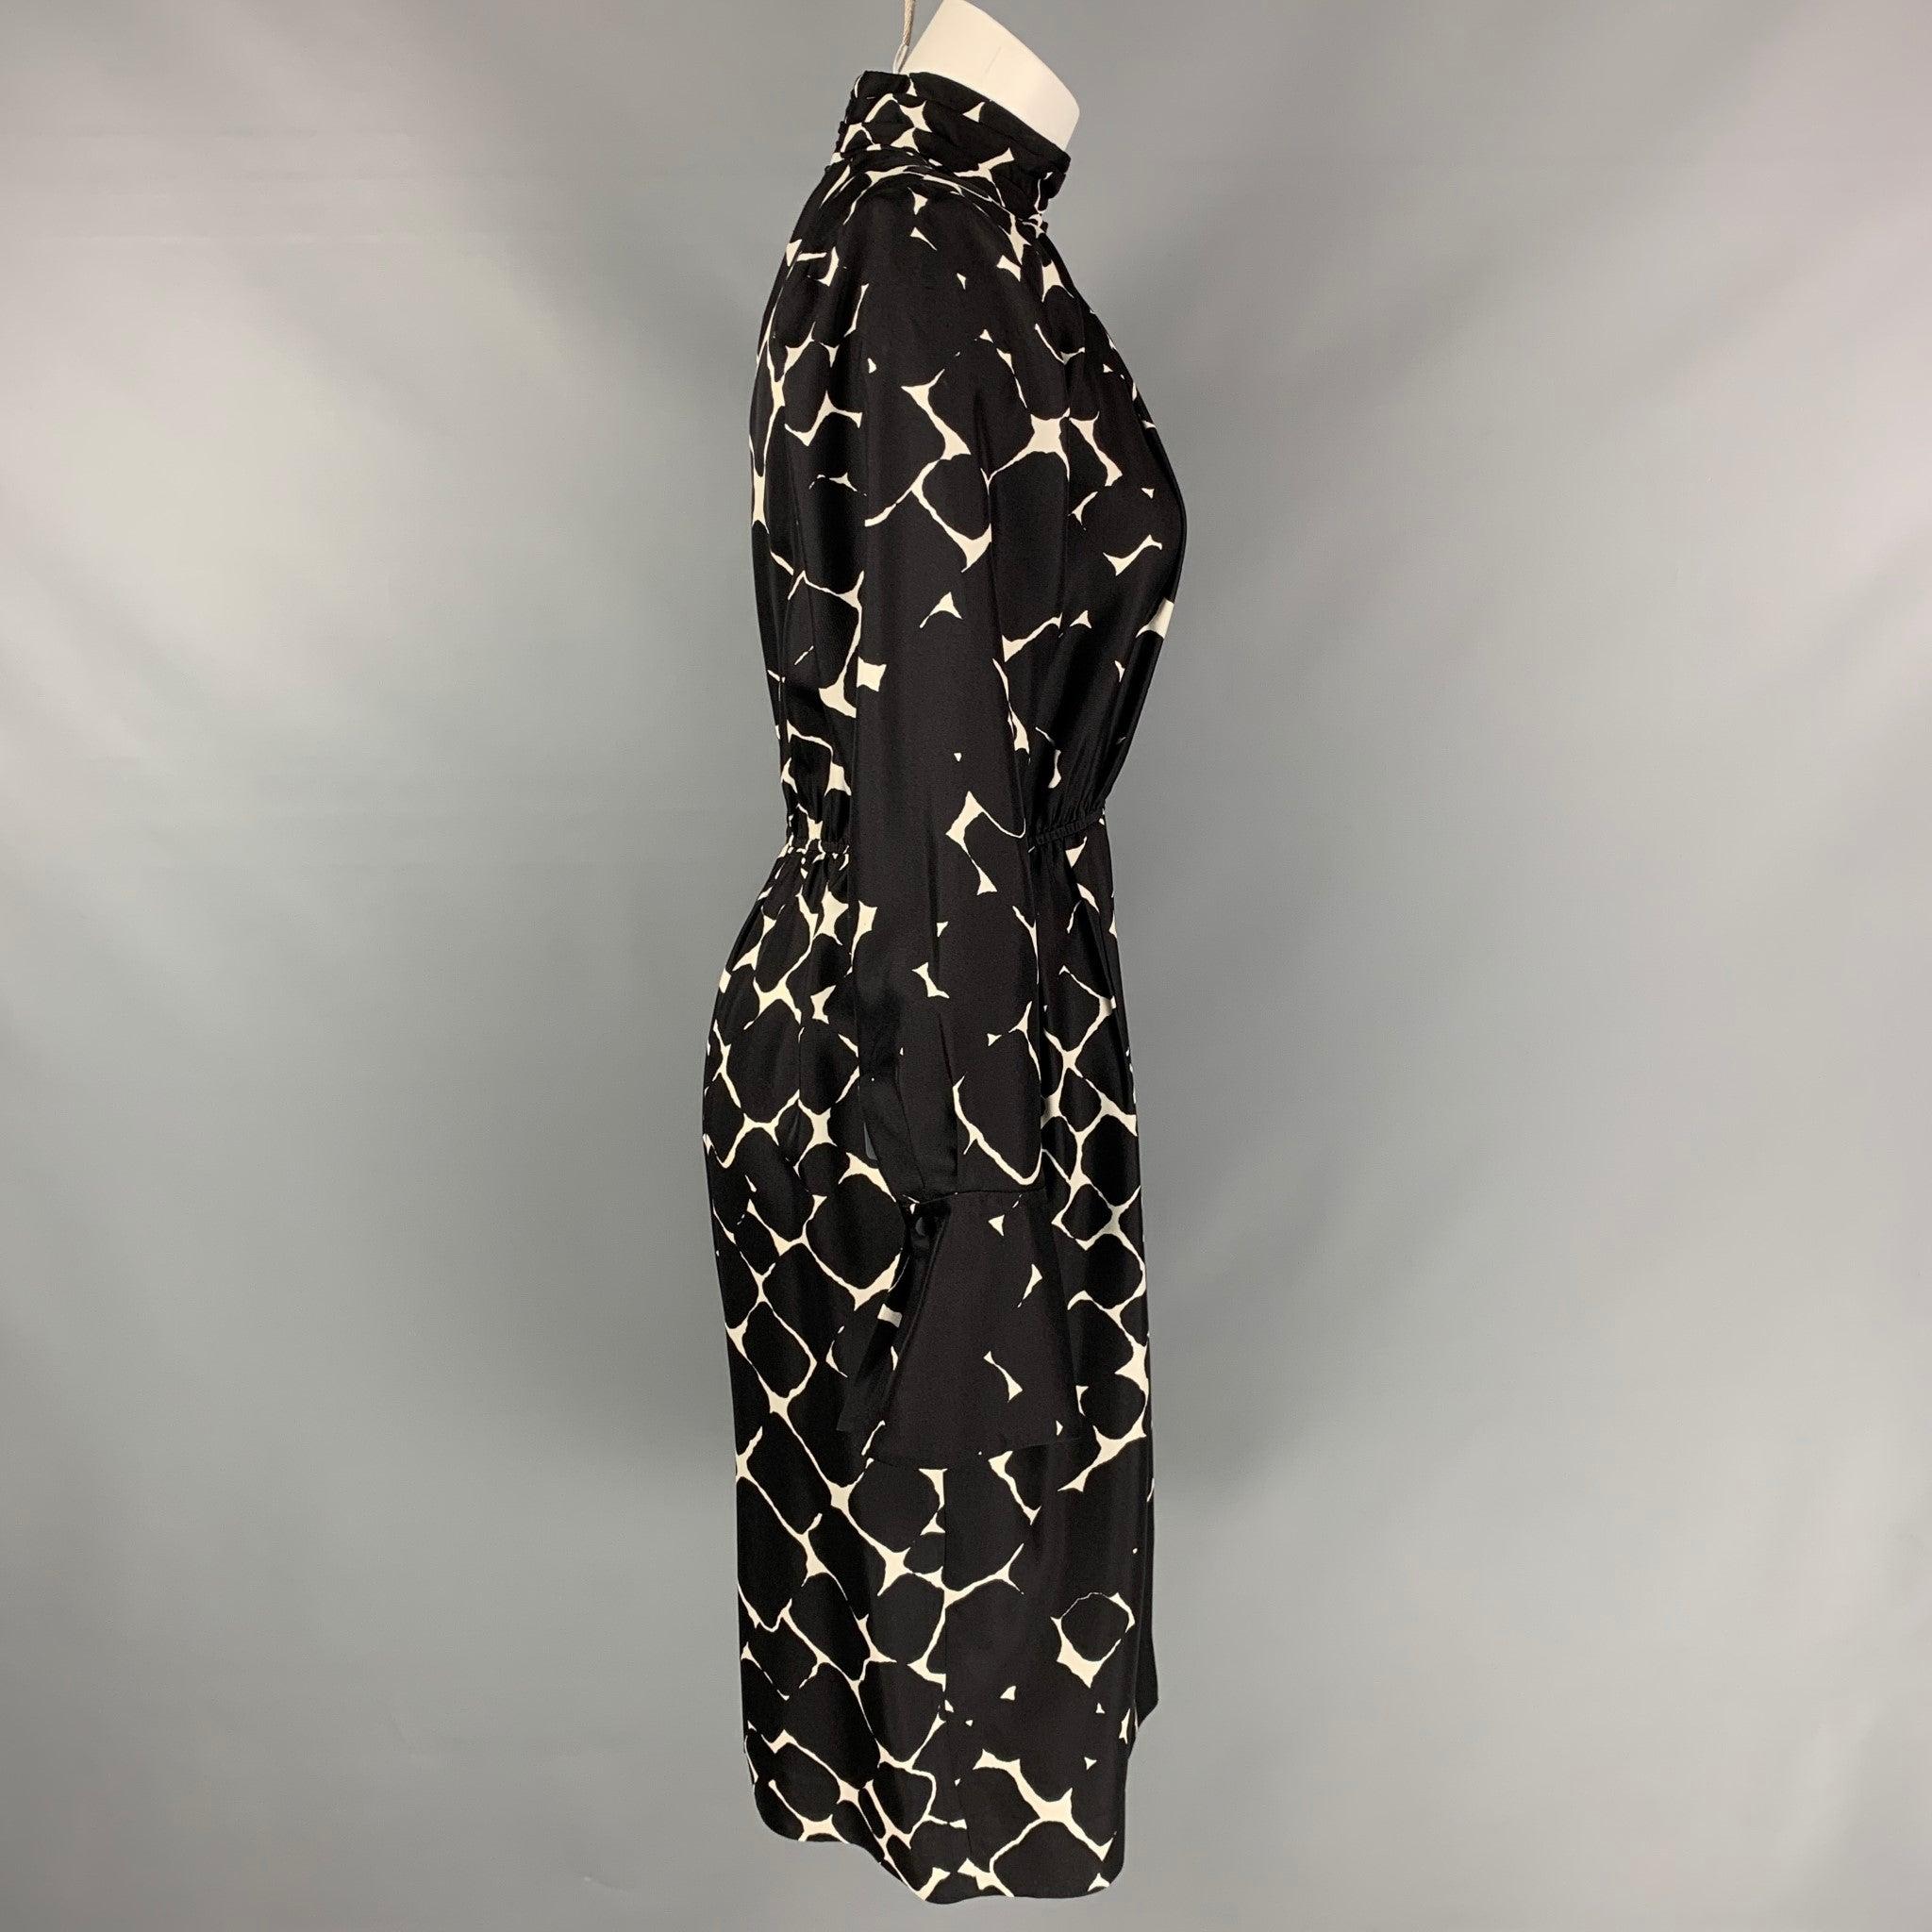 MARC JACOBS Size 4 Black & White Print Silk Shift Dress In Good Condition For Sale In San Francisco, CA